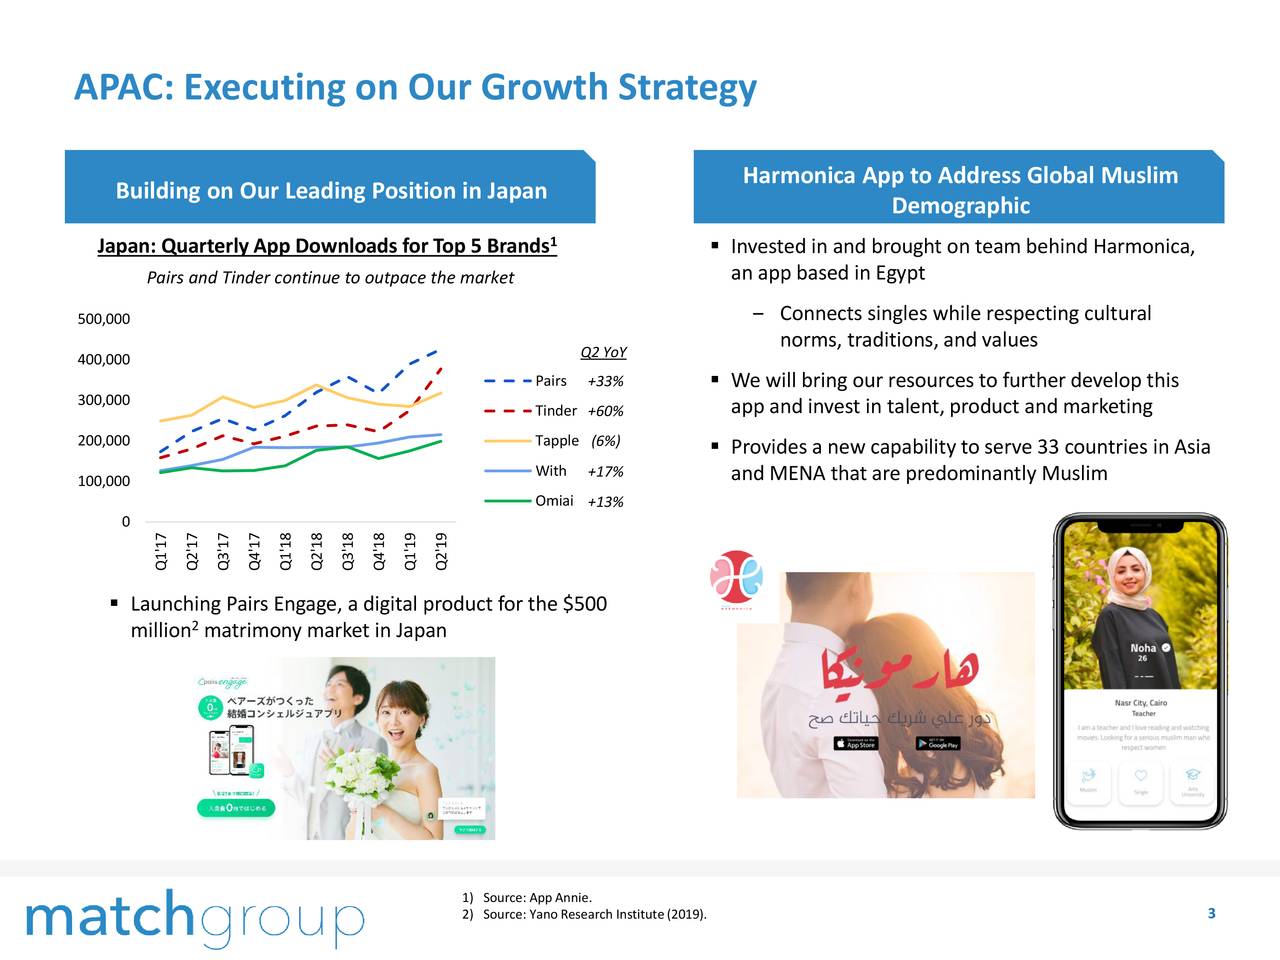 APAC: Executing on Our Growth Strategy